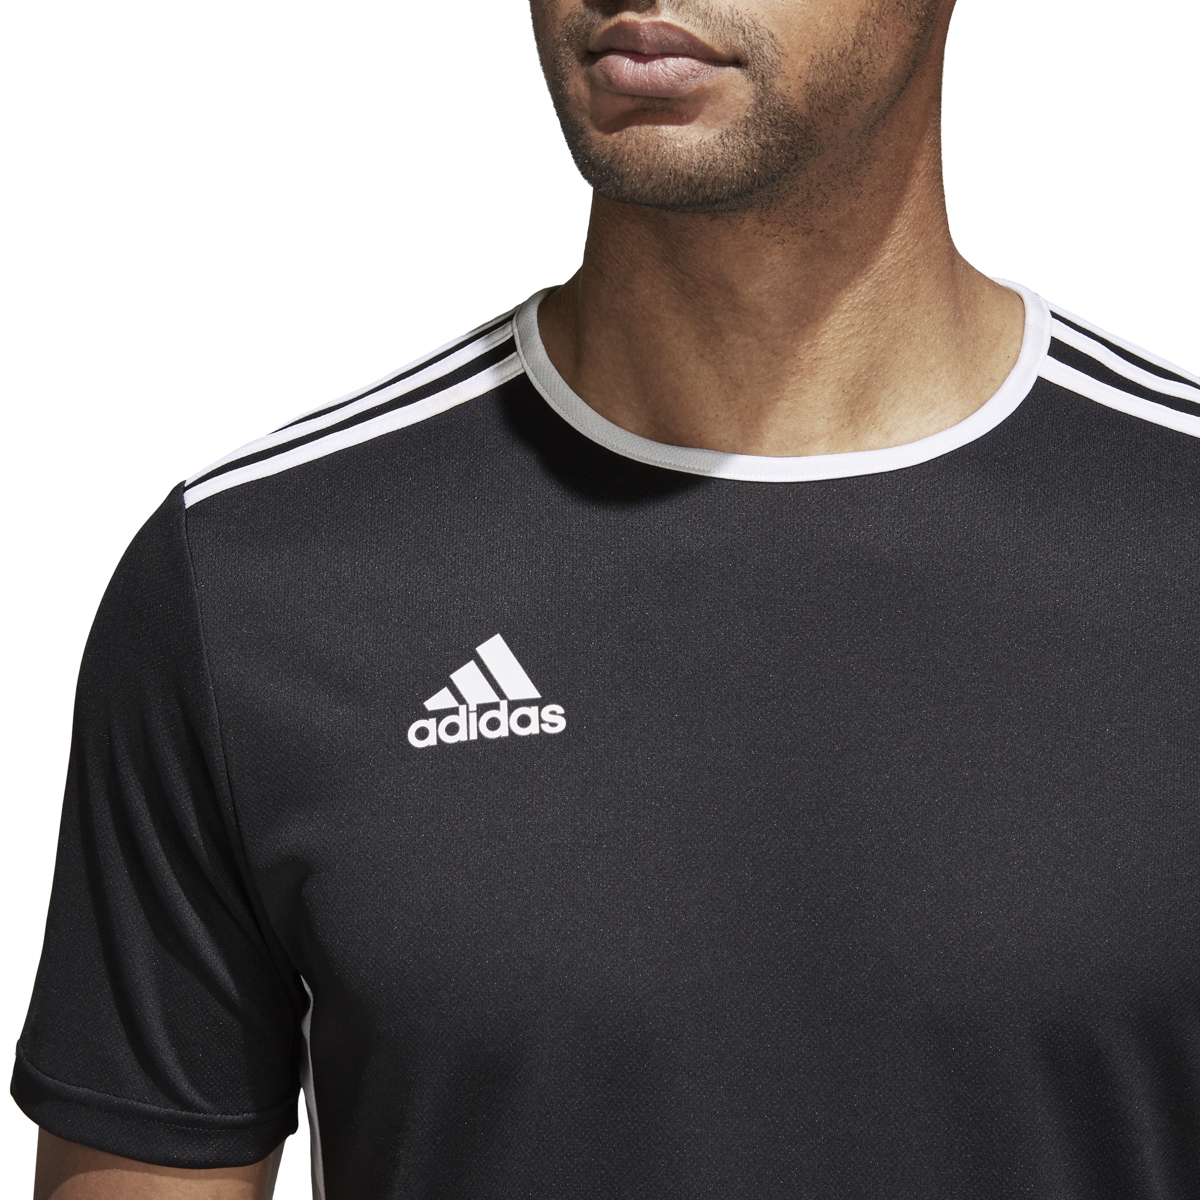 Adidas Men's Soccer Entrada 18 Jersey Adidas - Ships Directly From Adidas - image 4 of 6